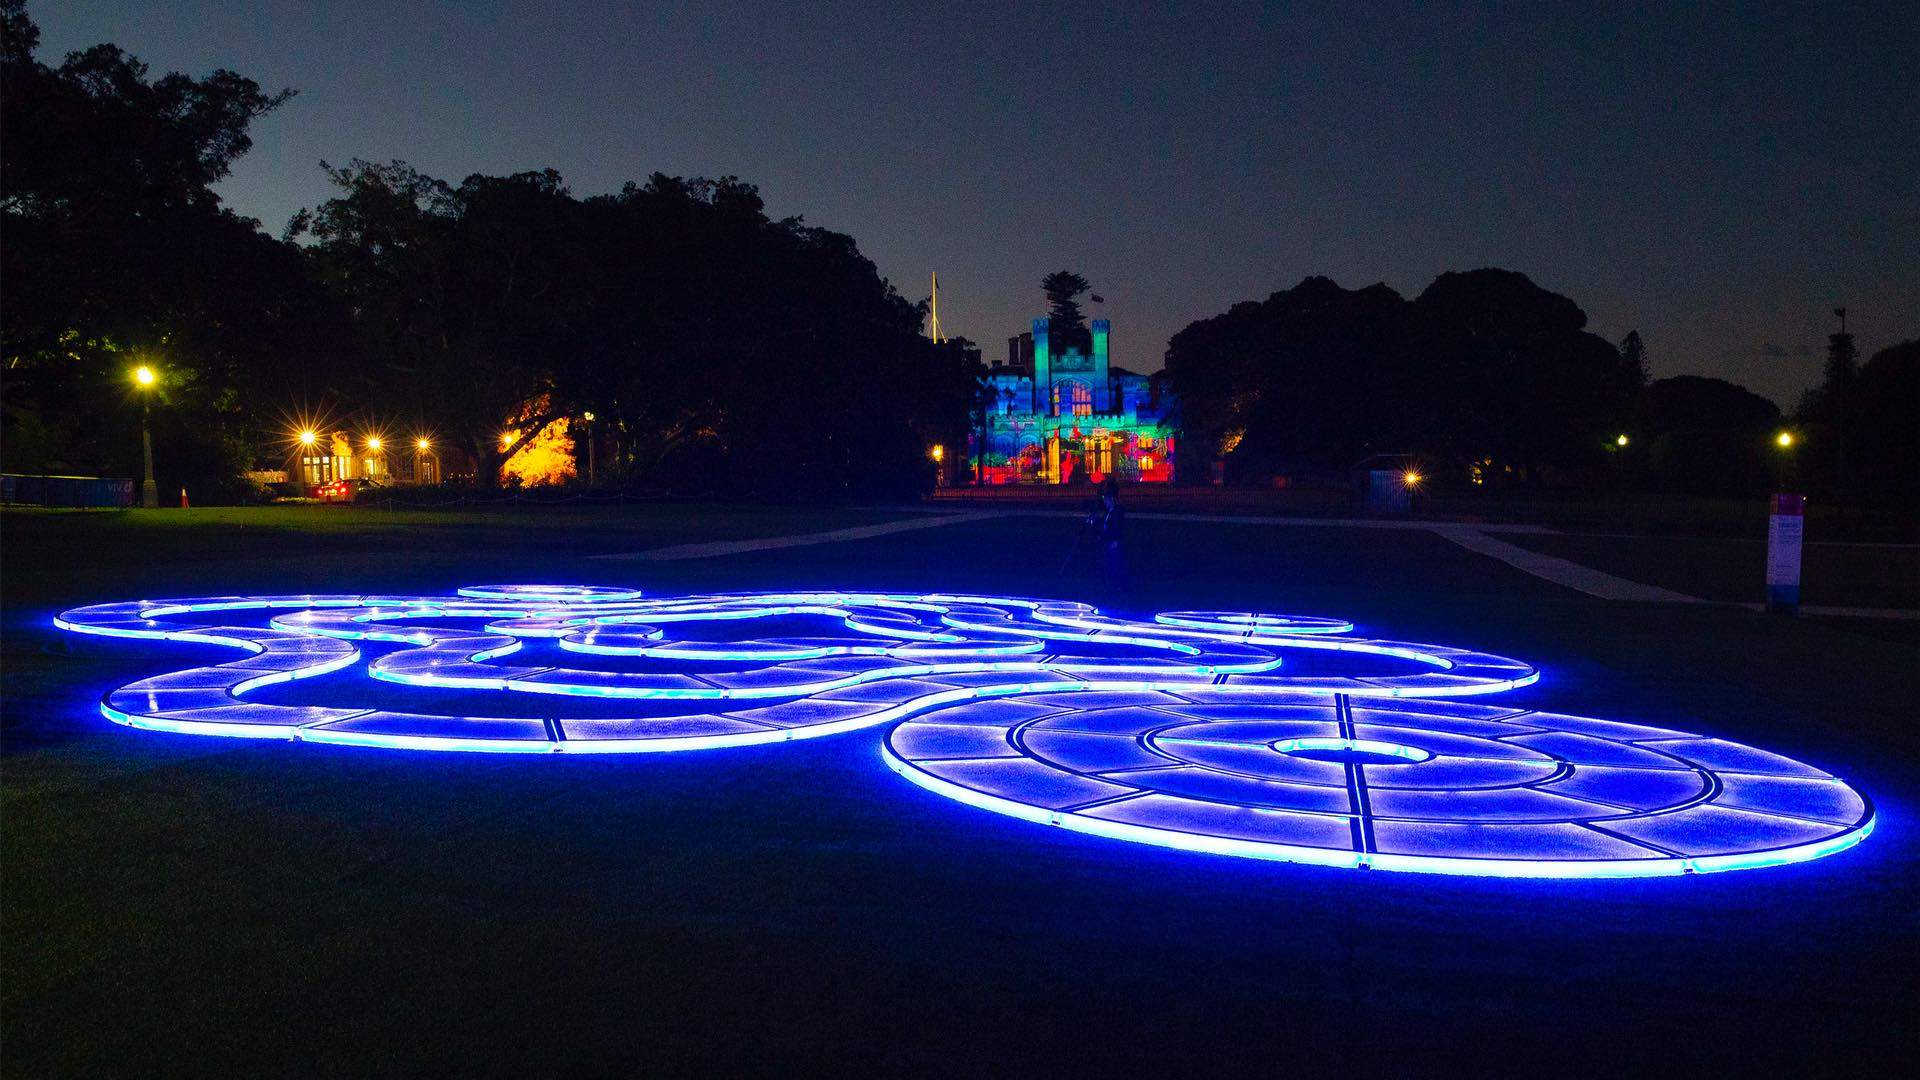 Sixteen Glowing Installations Have Popped Up in the Royal Botanic Garden for Vivid Sydney 2018